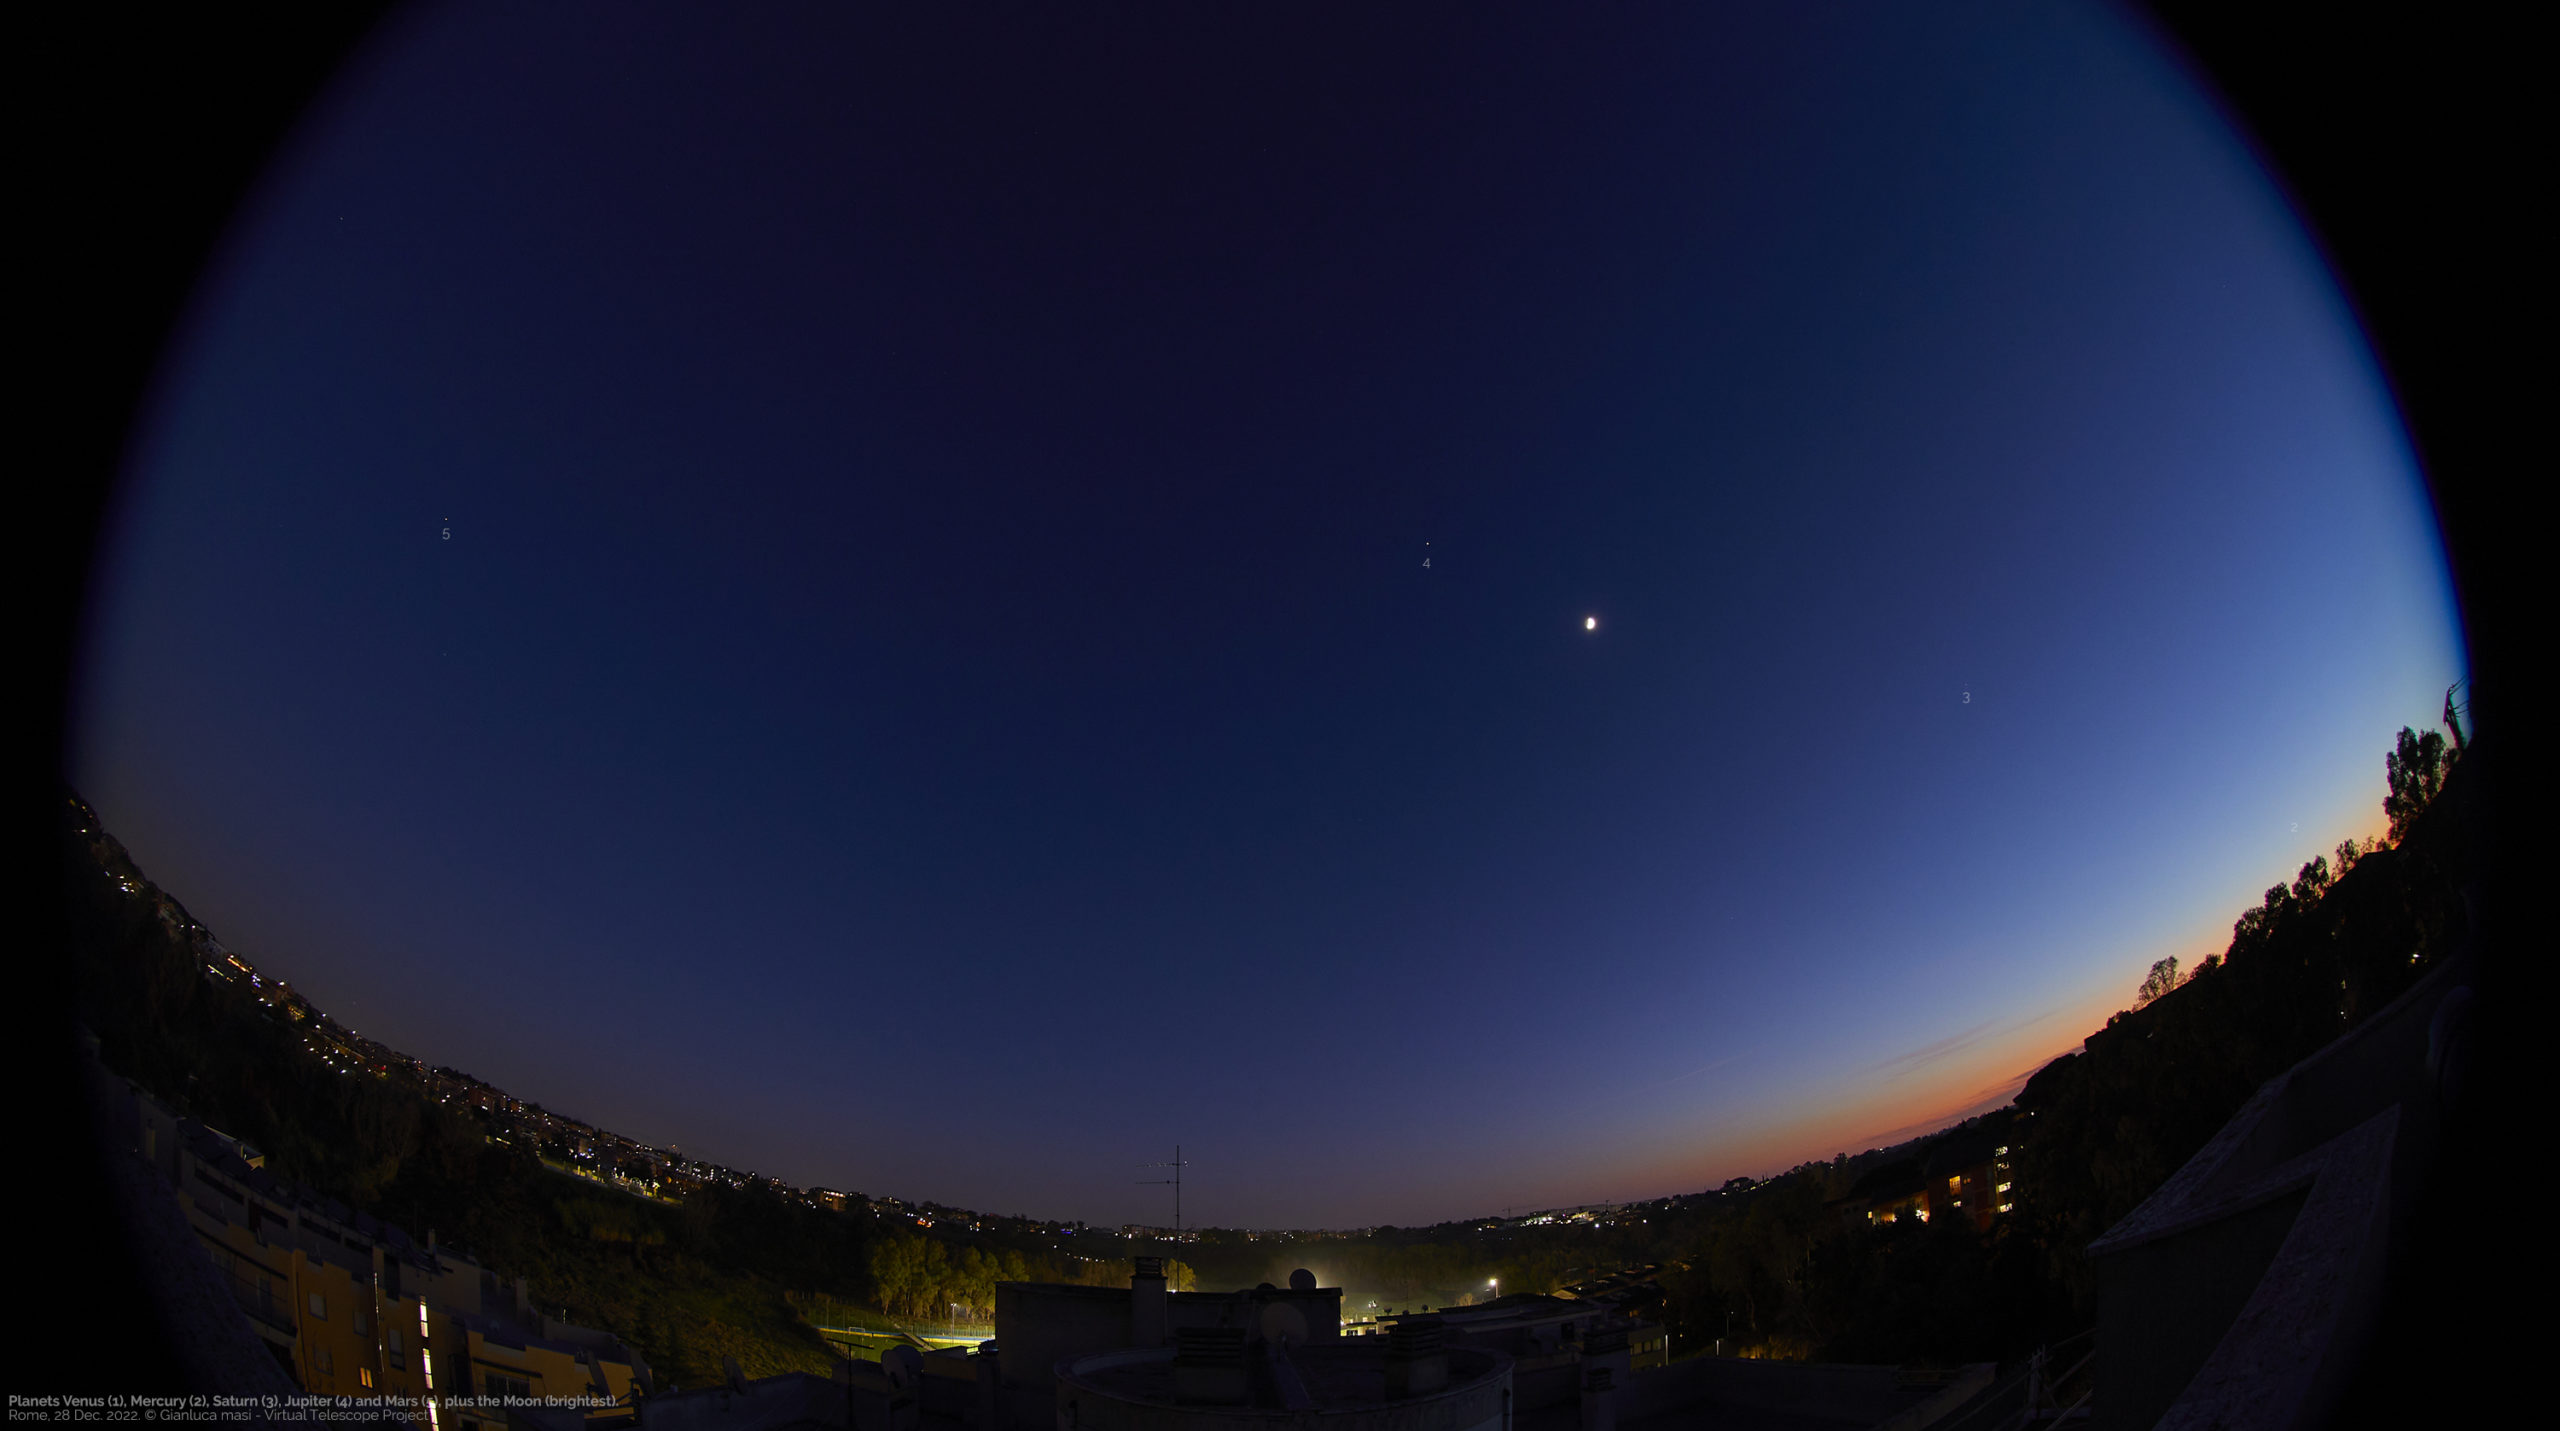 All the five naked eye planets, plus the Moon and the Earth, as seen from Rome on 28 Dec. 2022.